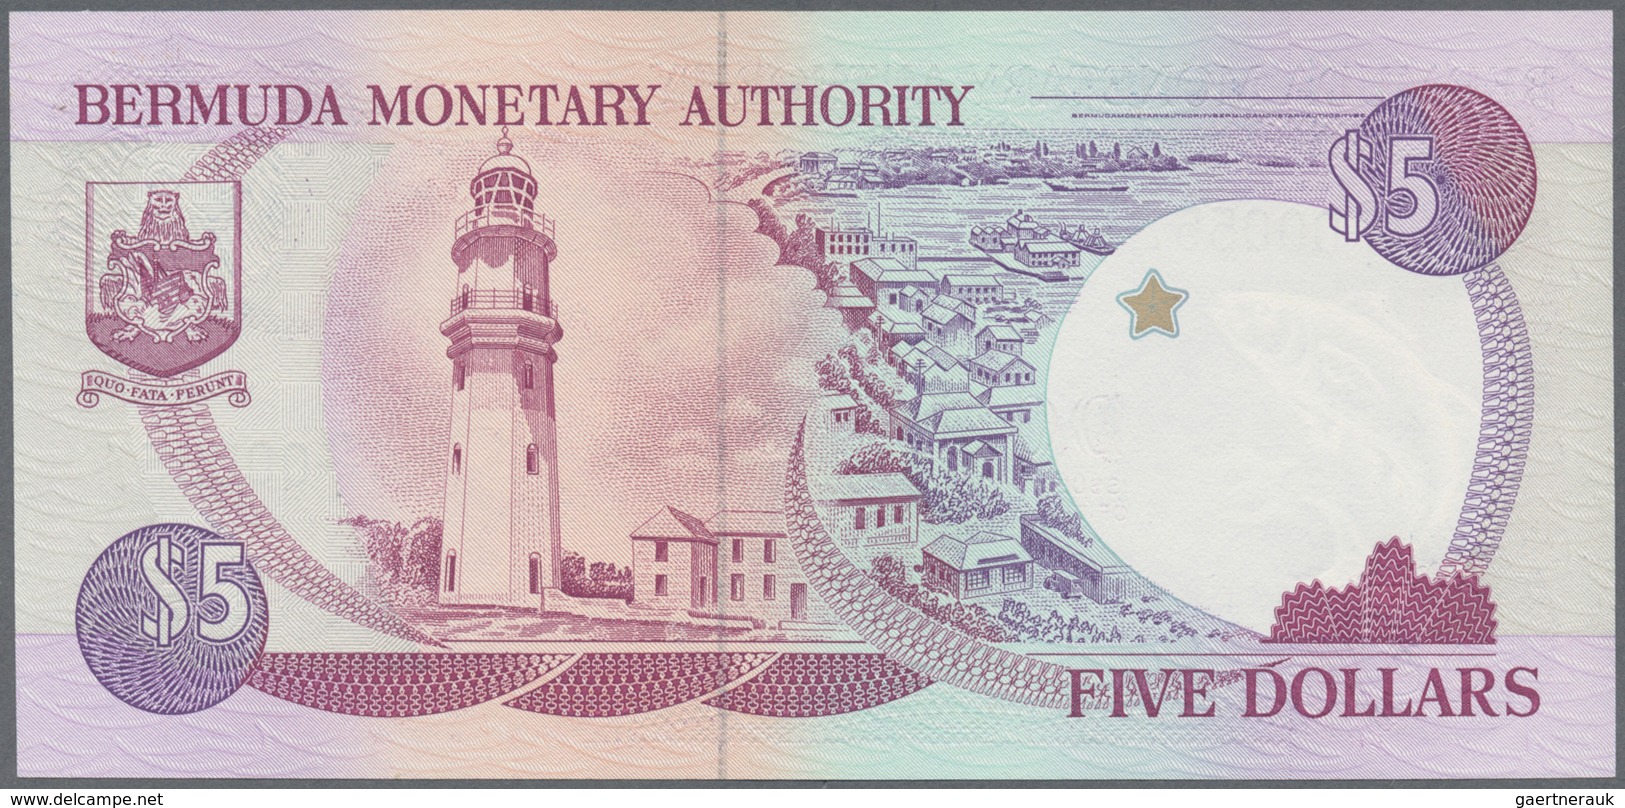 Bermuda: Set with 6 Banknotes, all with  Matching Low Serial number $2, $5, $10, $20, $50, $100 all